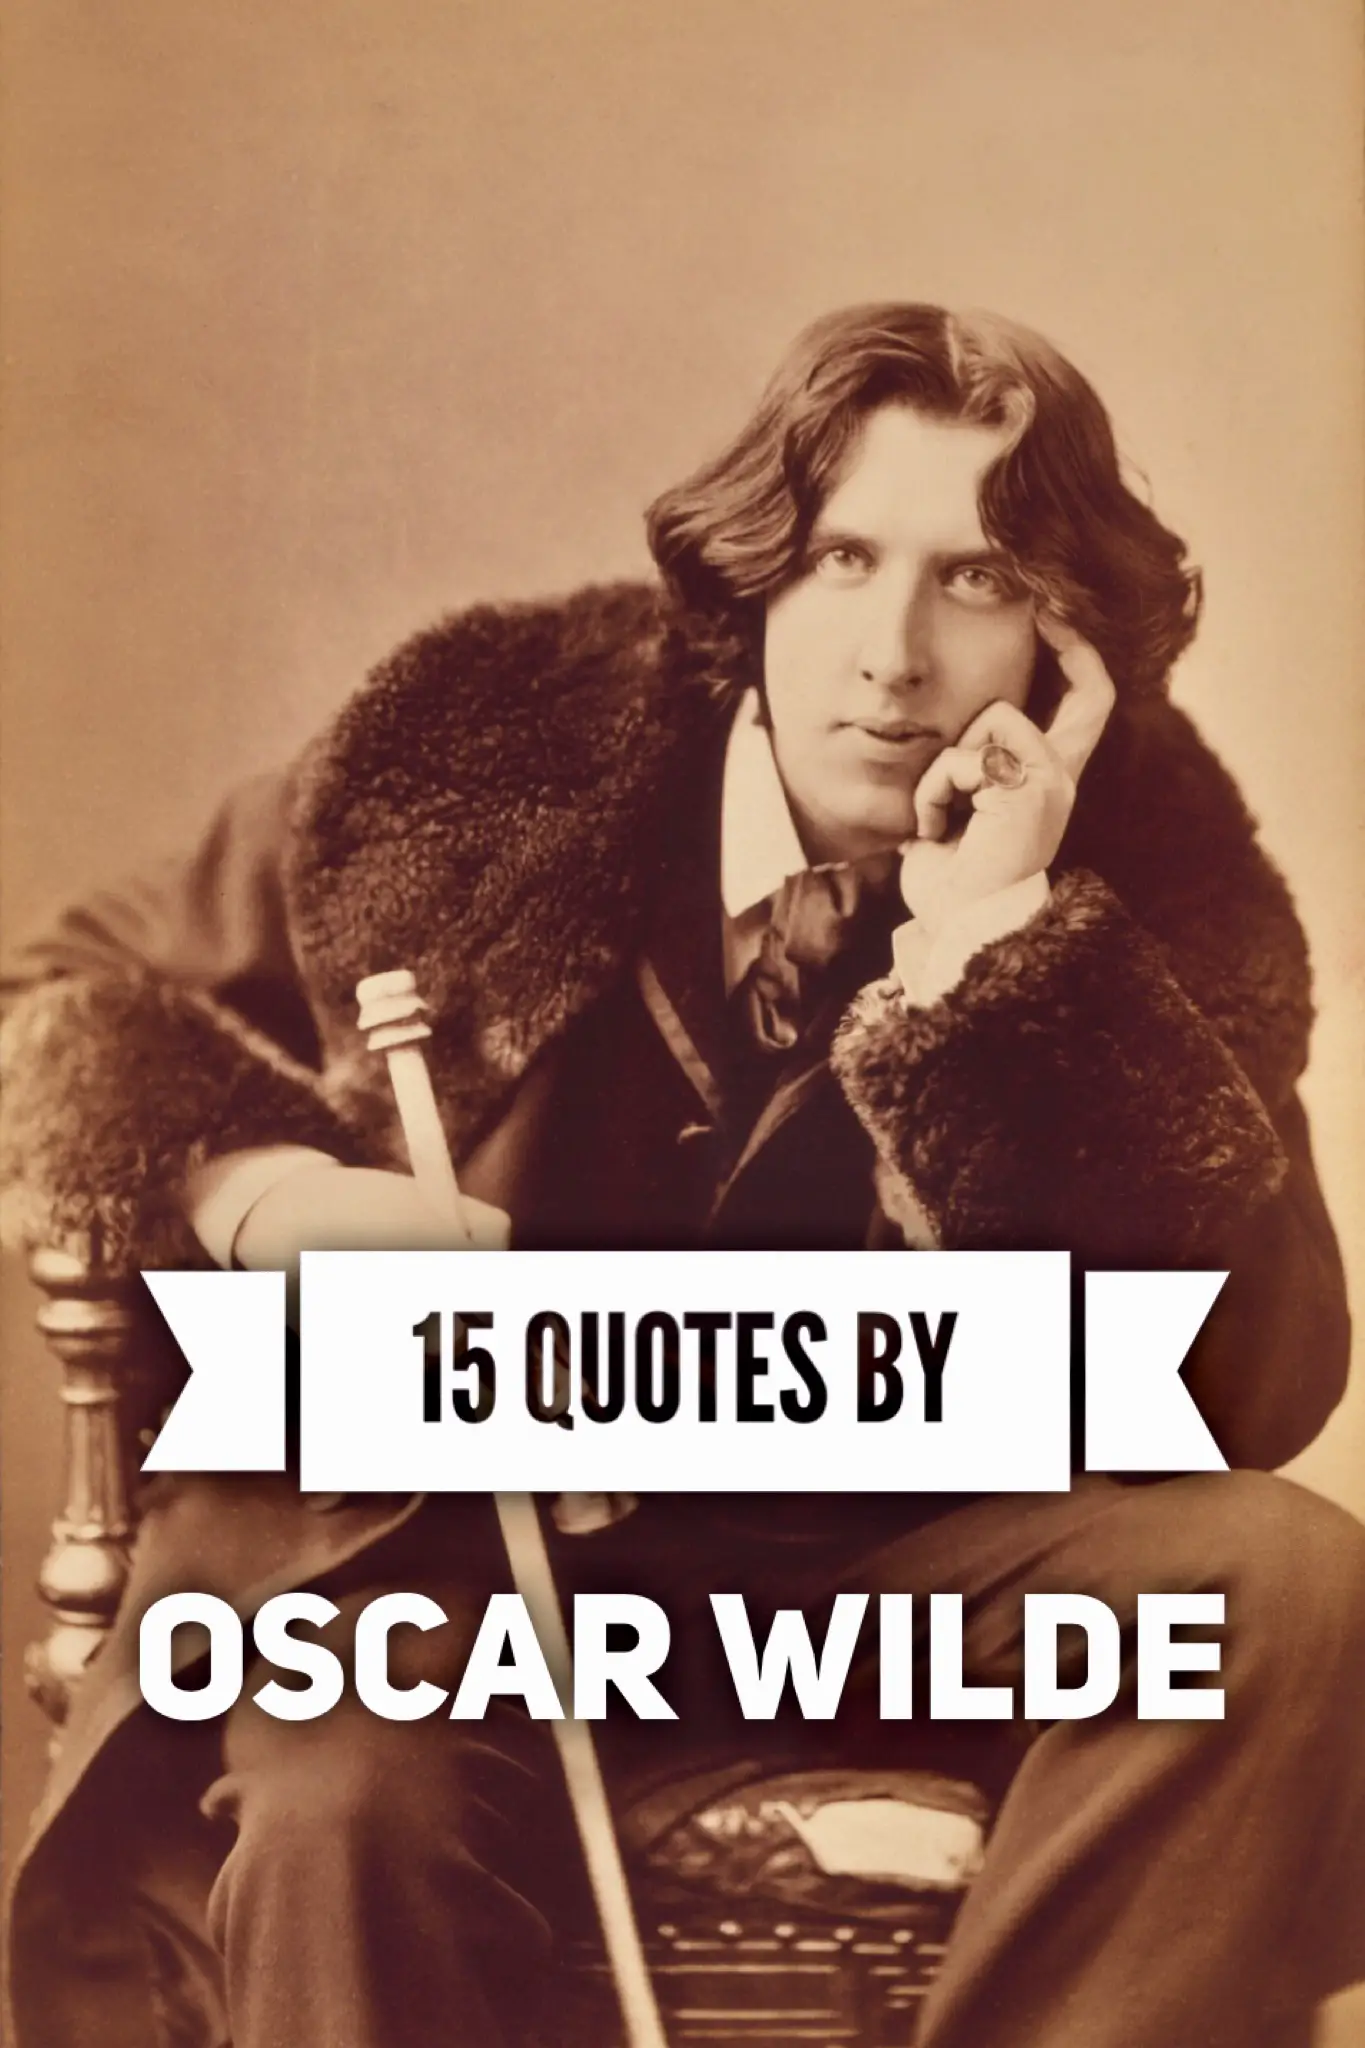 15 Quotes by Oscar Wilde that are sharp and witty - Roy Sutton